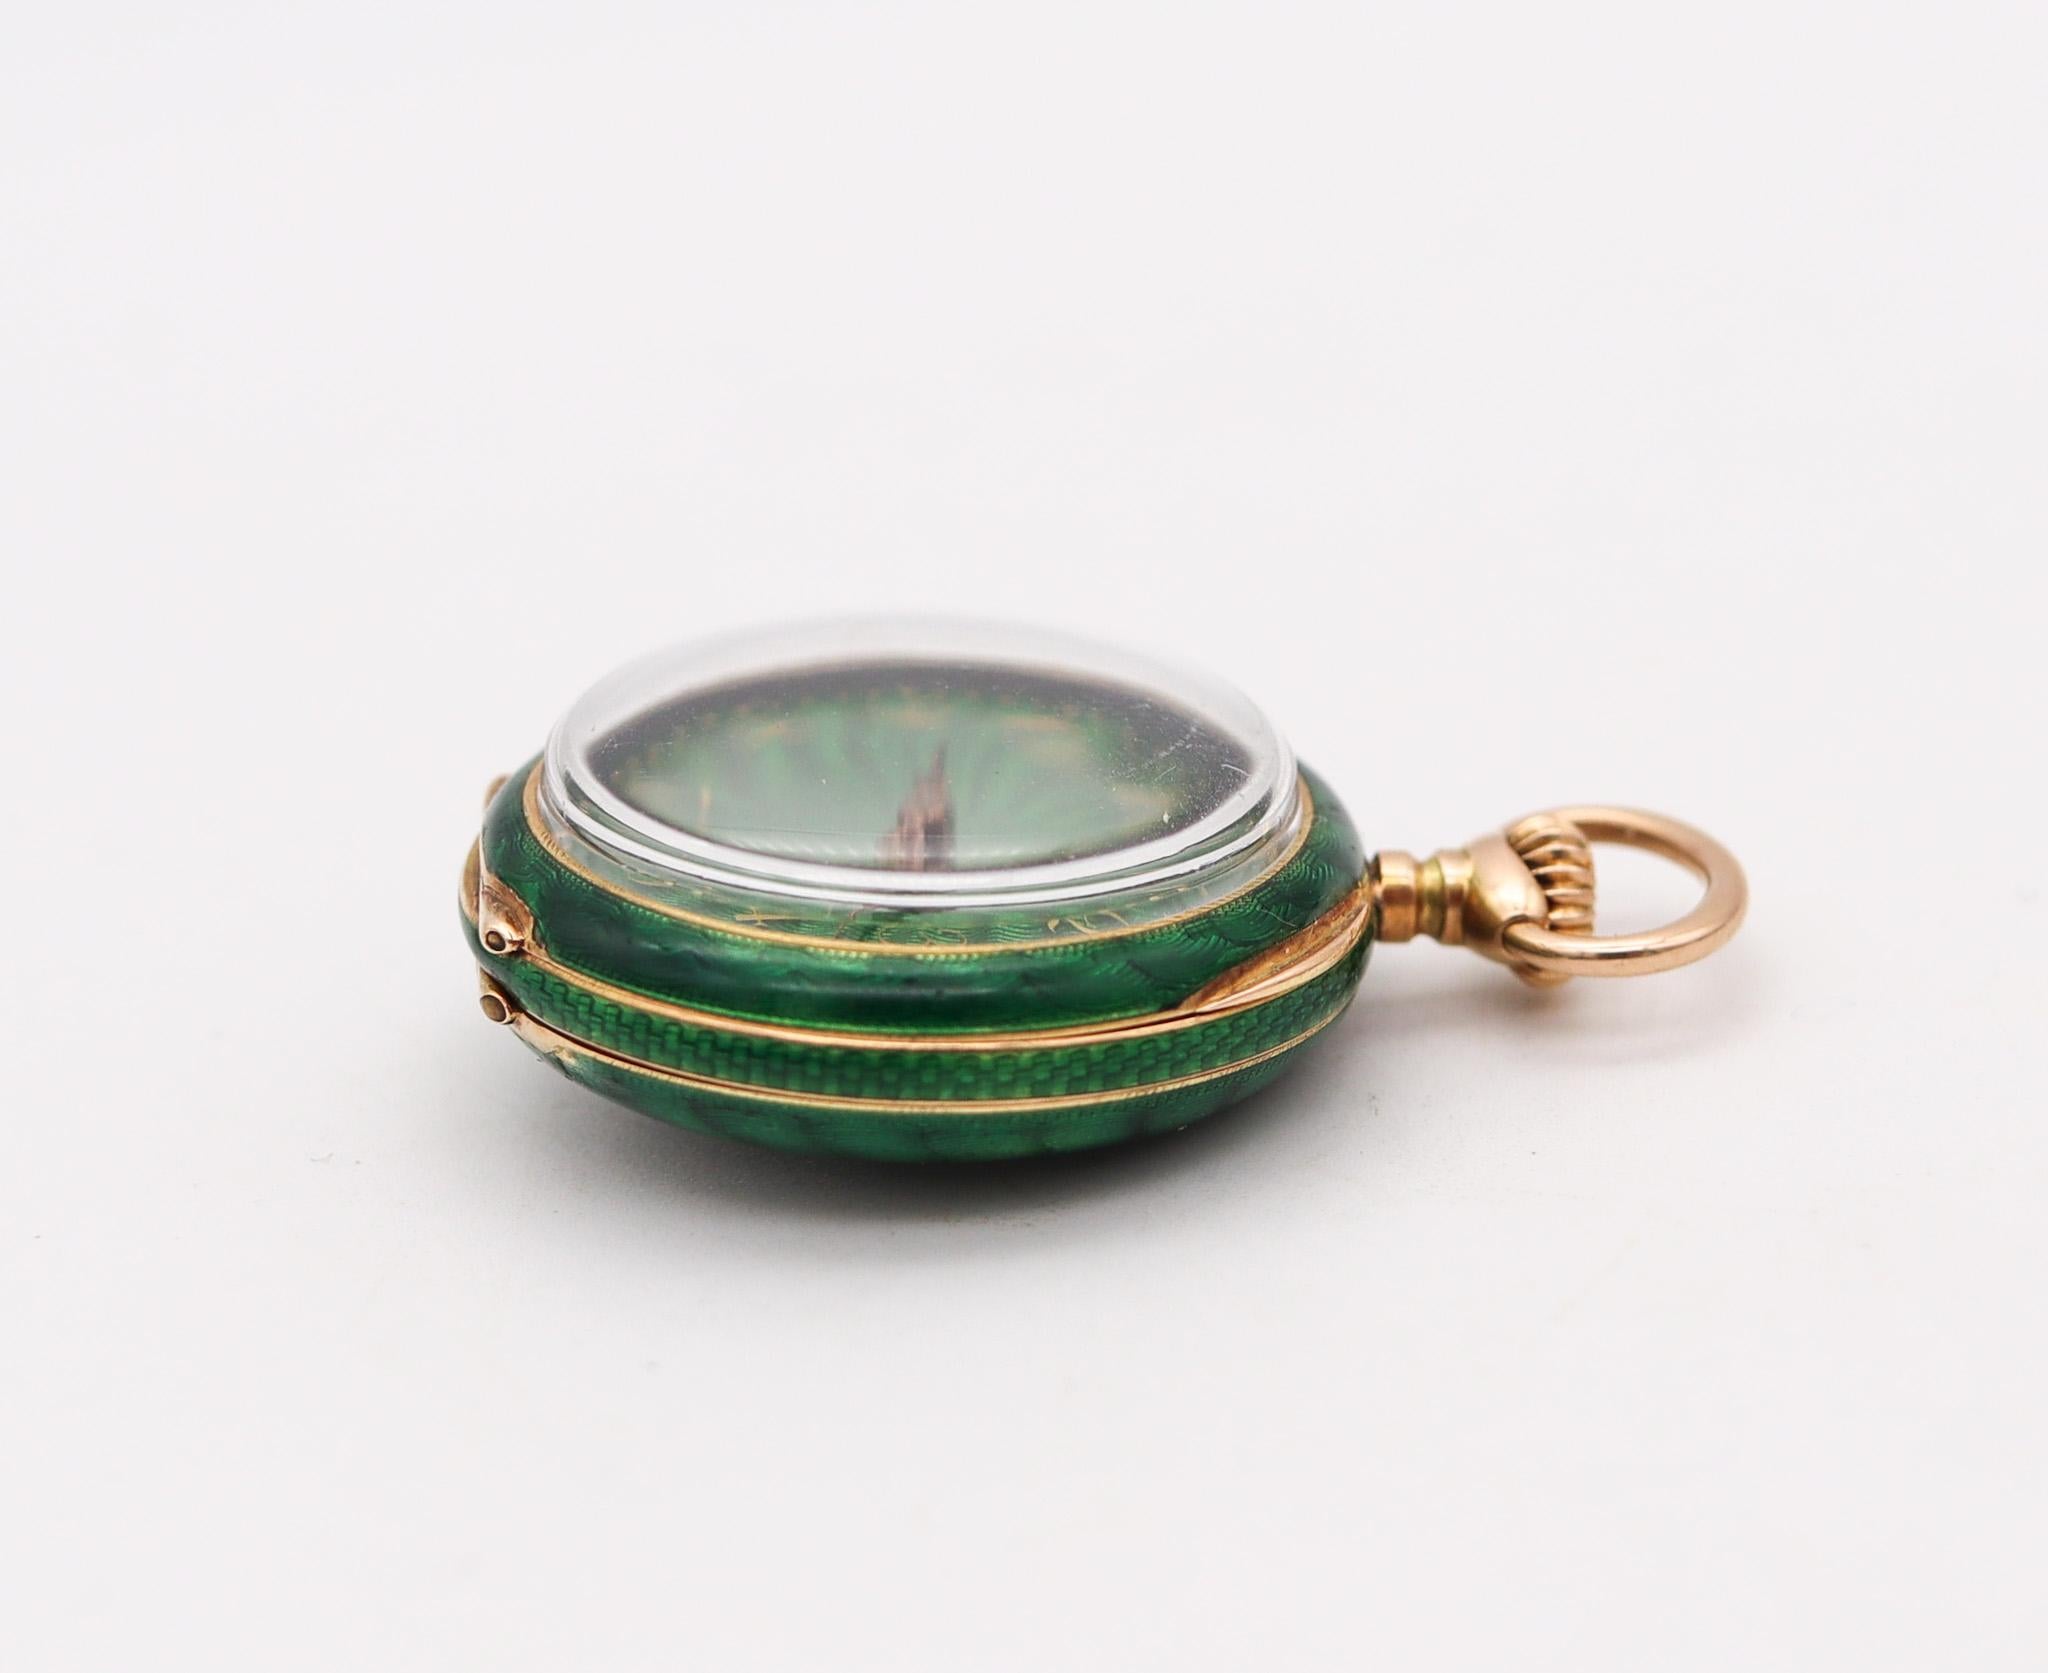 Edwardian Swiss pocket watch pendant in guilloche,

Gorgeous open face pocket watch, created in Switzerland during the Edwardian period, back in the 1905. Crafted in solid yellow gold of 14 karats end embellished with a vivid green hot enamel over a